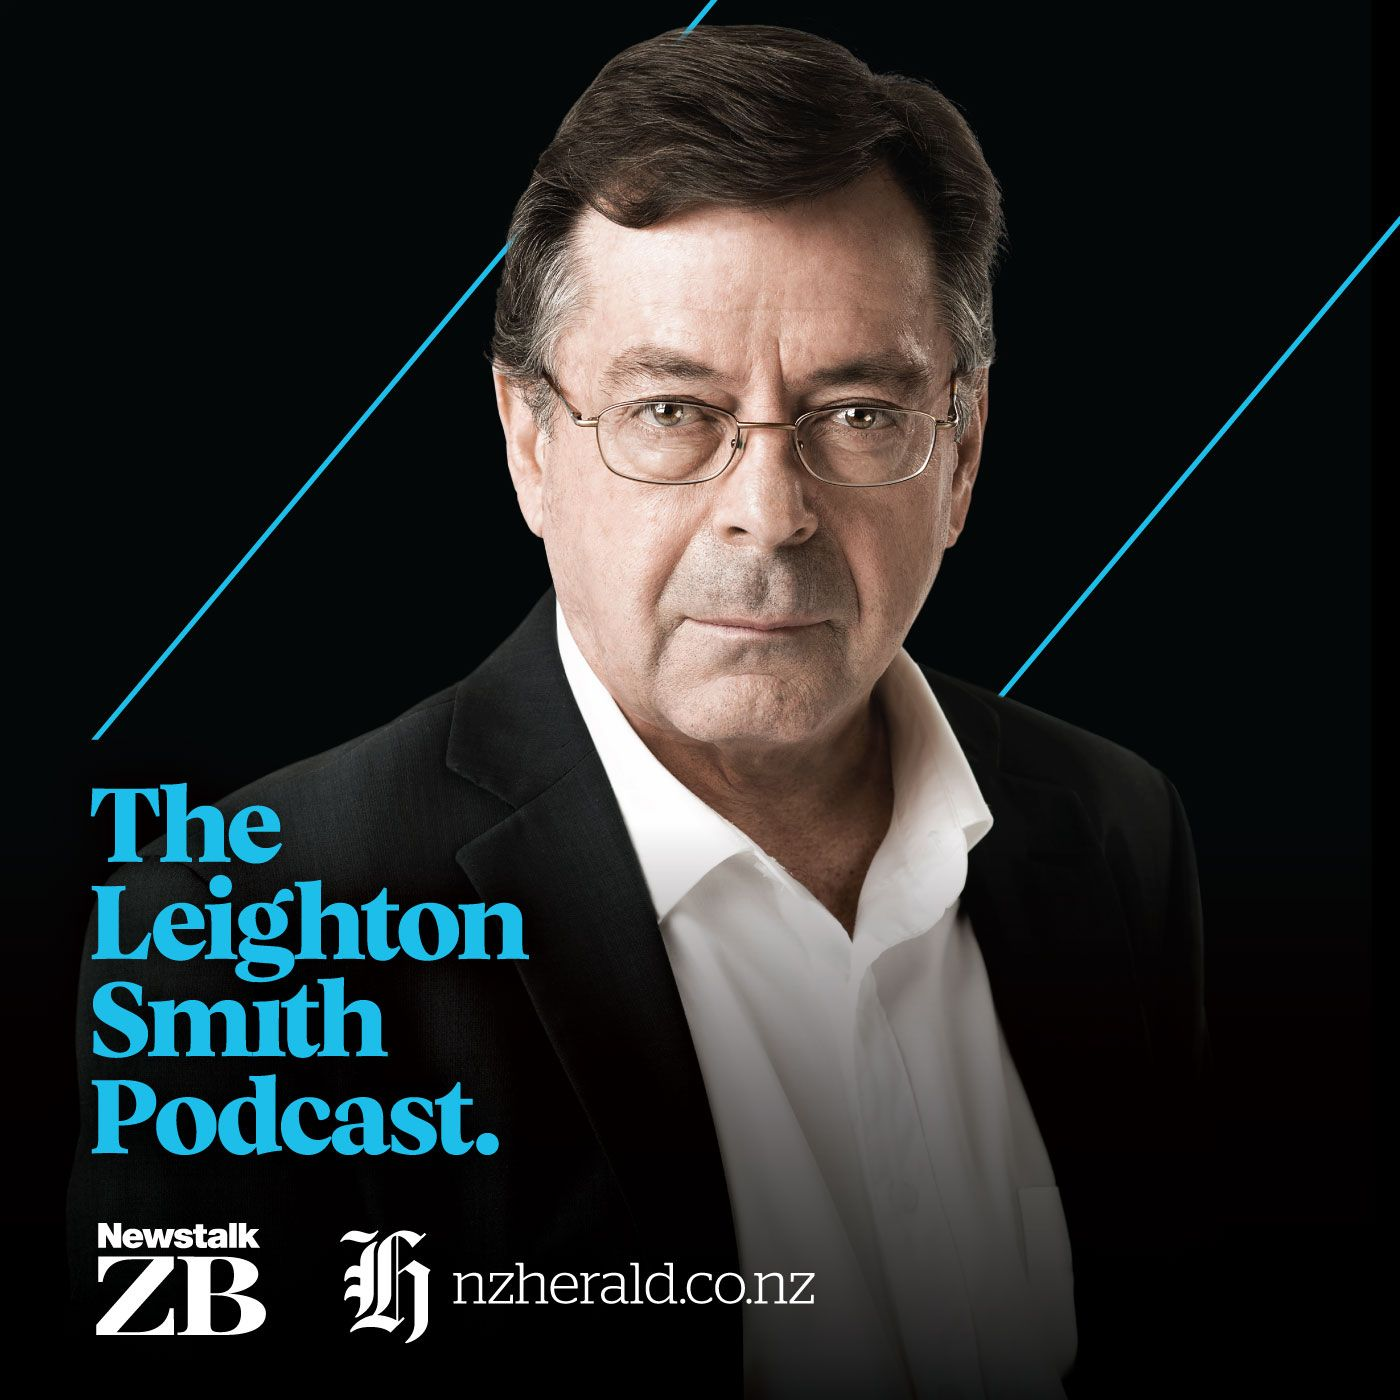 Leighton Smith Podcast Episode 26 - July 24th 2019